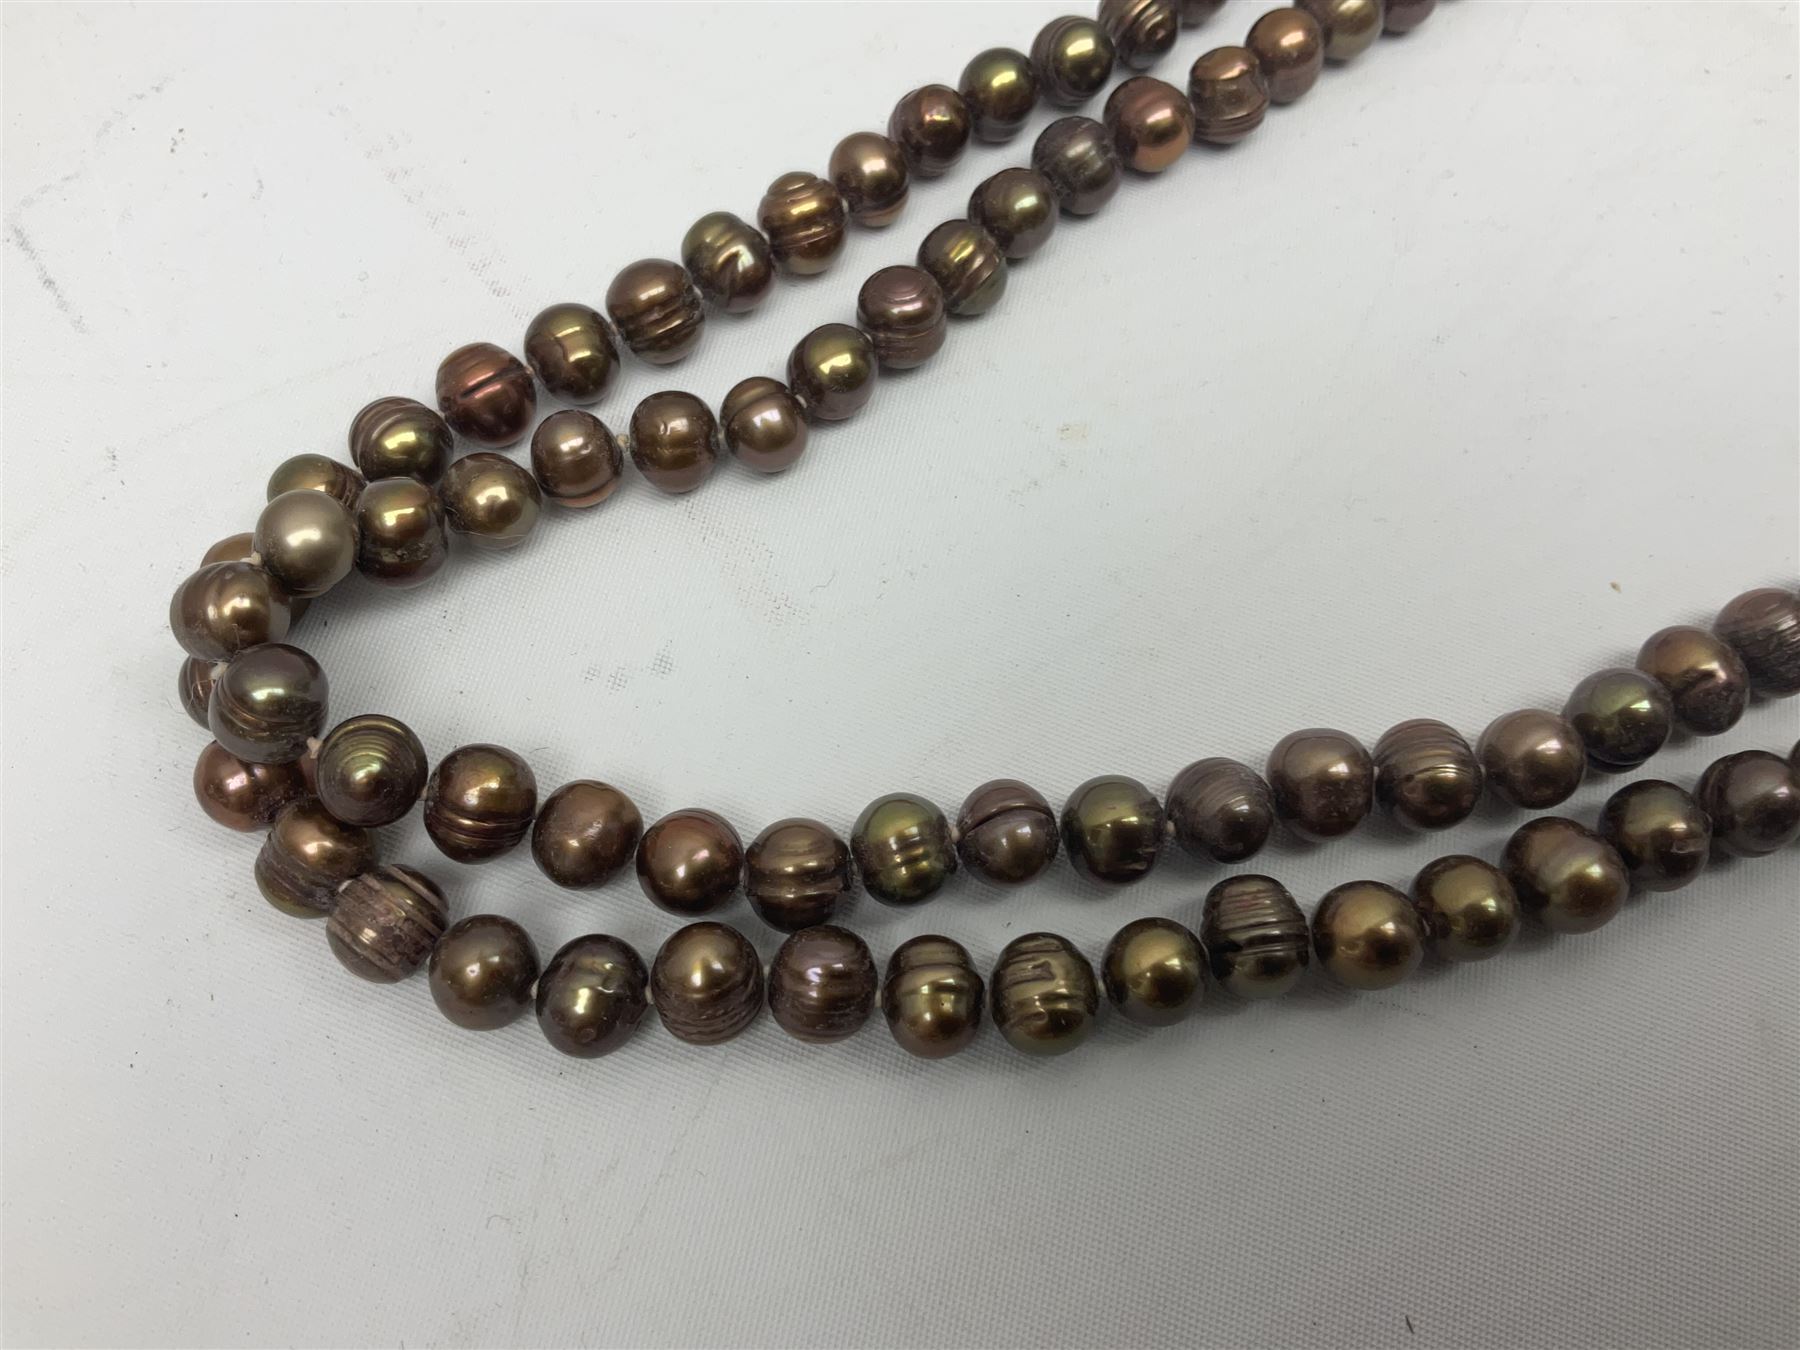 Six fresh water pearl necklaces - Image 21 of 36